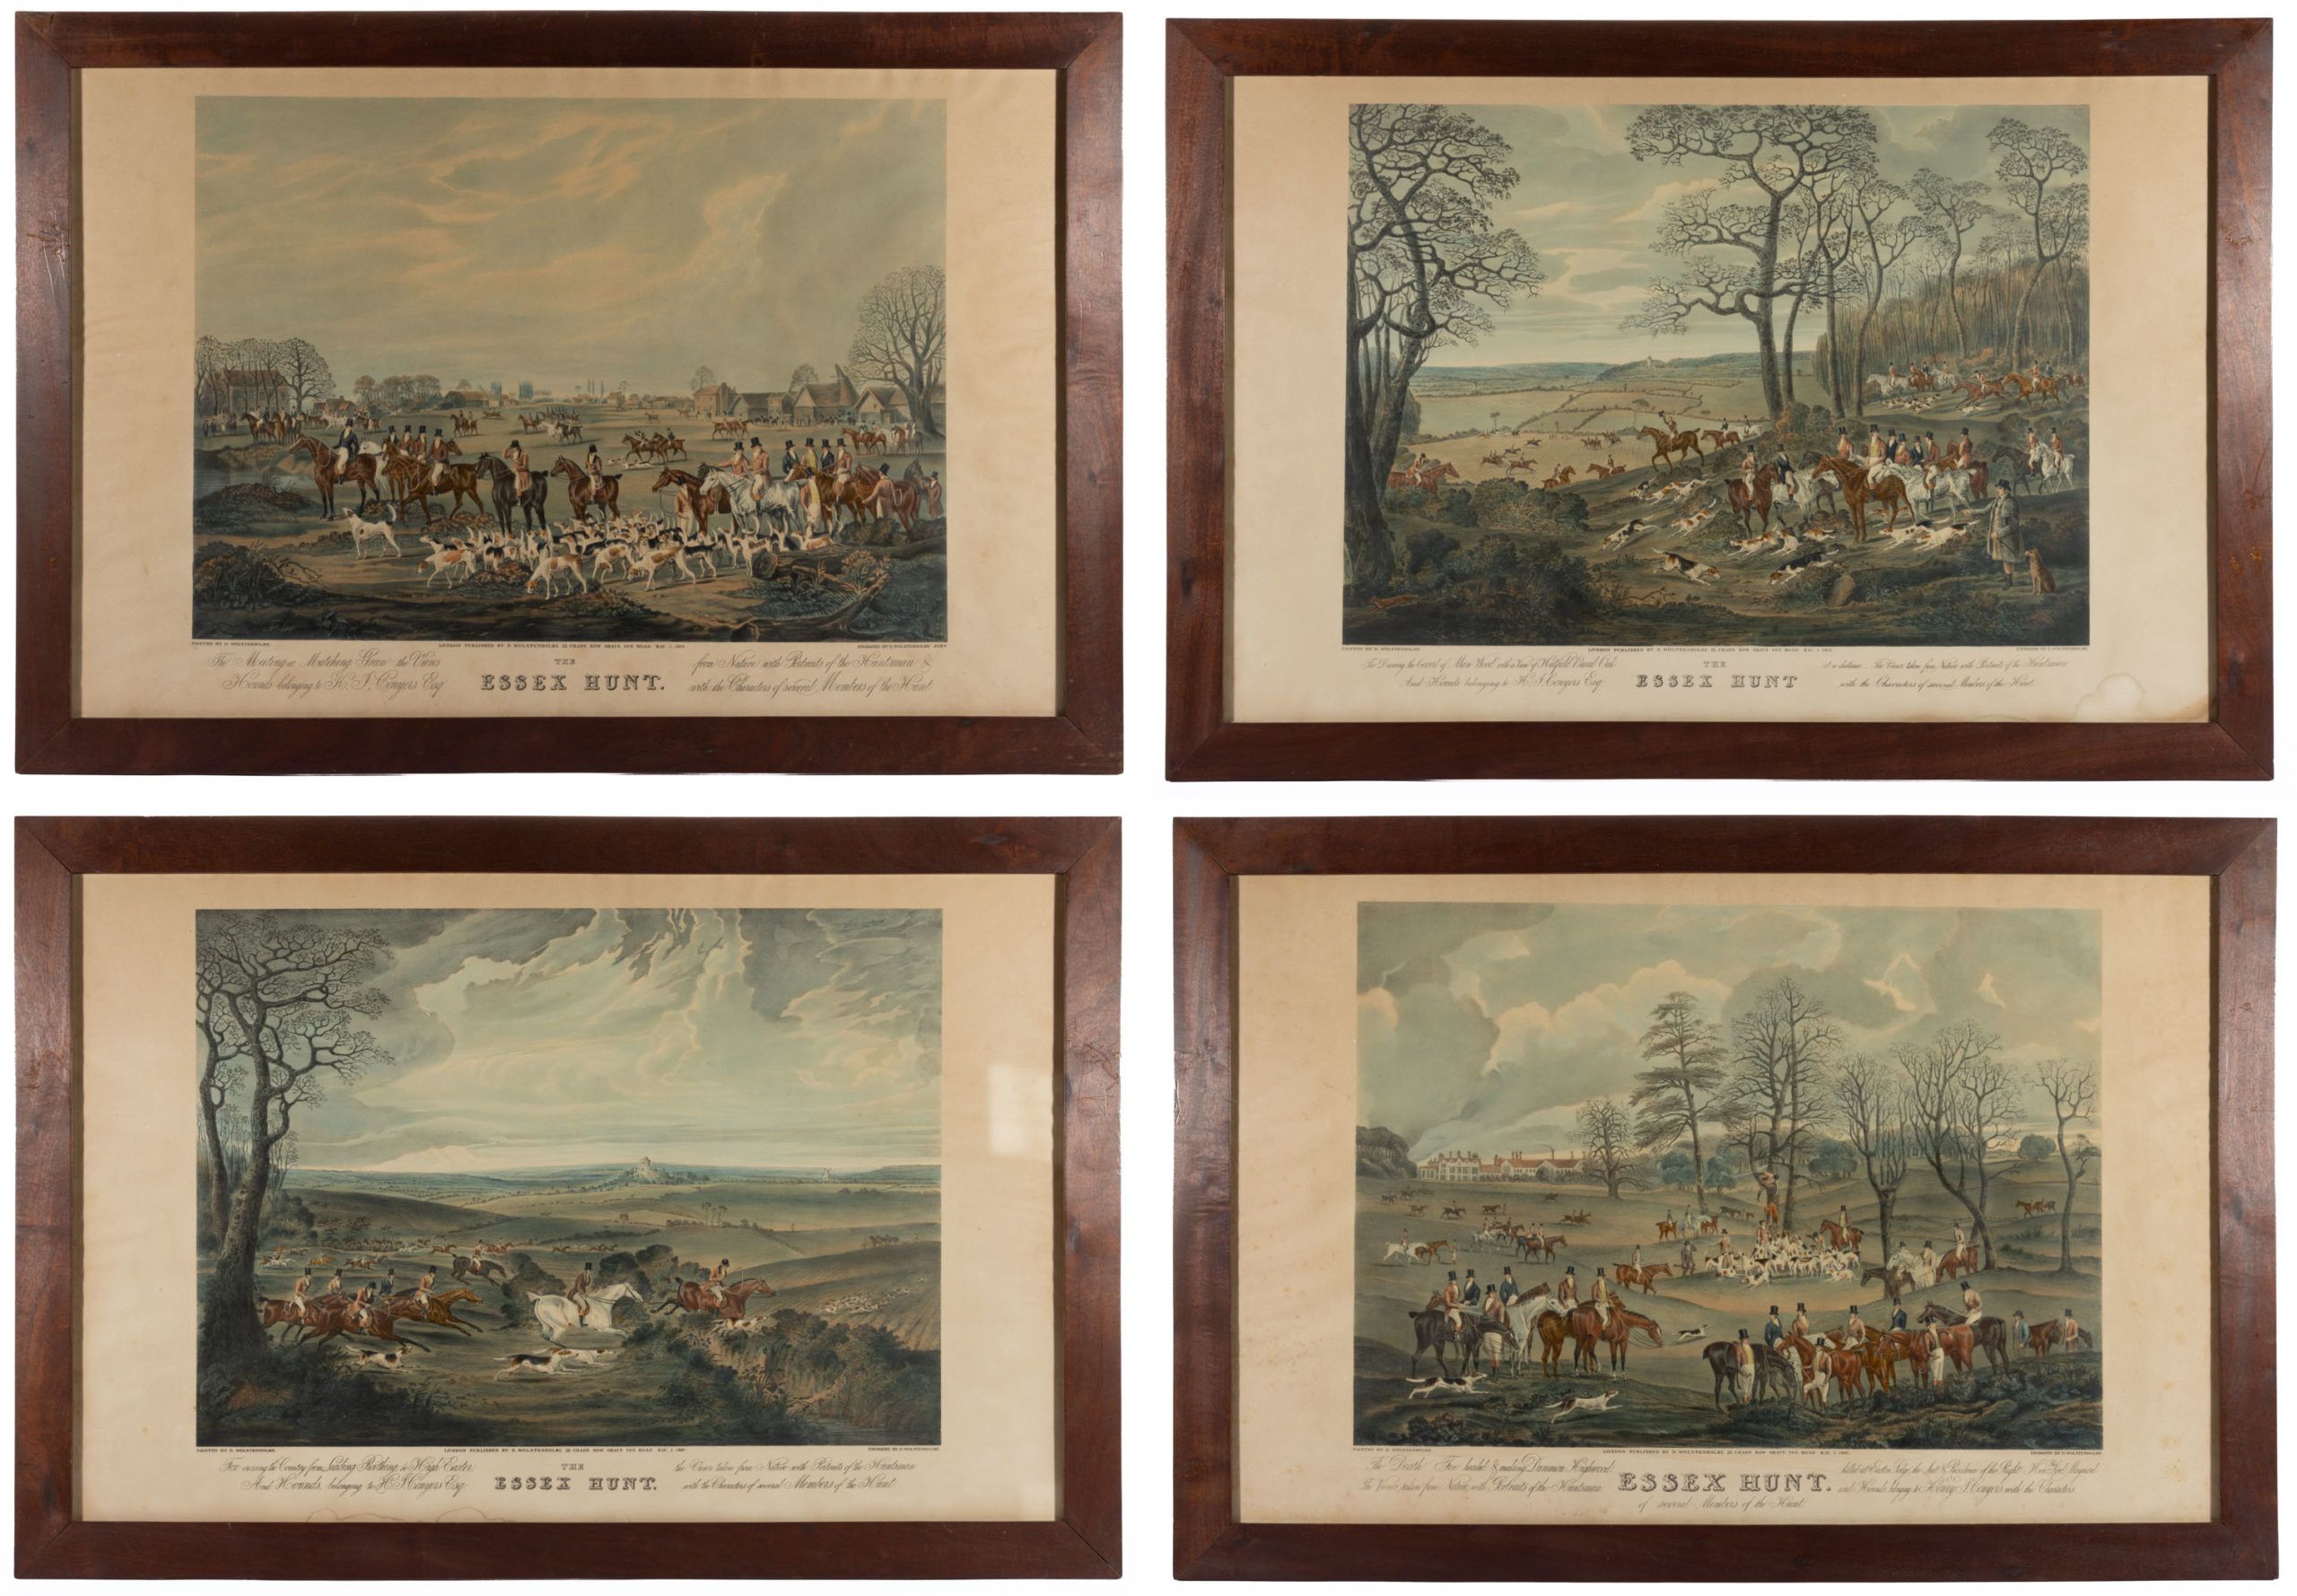 AFTER DEAN WOLSTENHOME (BRITISH, 1757-1837), “THE ESSEX HUNT” PRINTS, LOT OF FOUR,